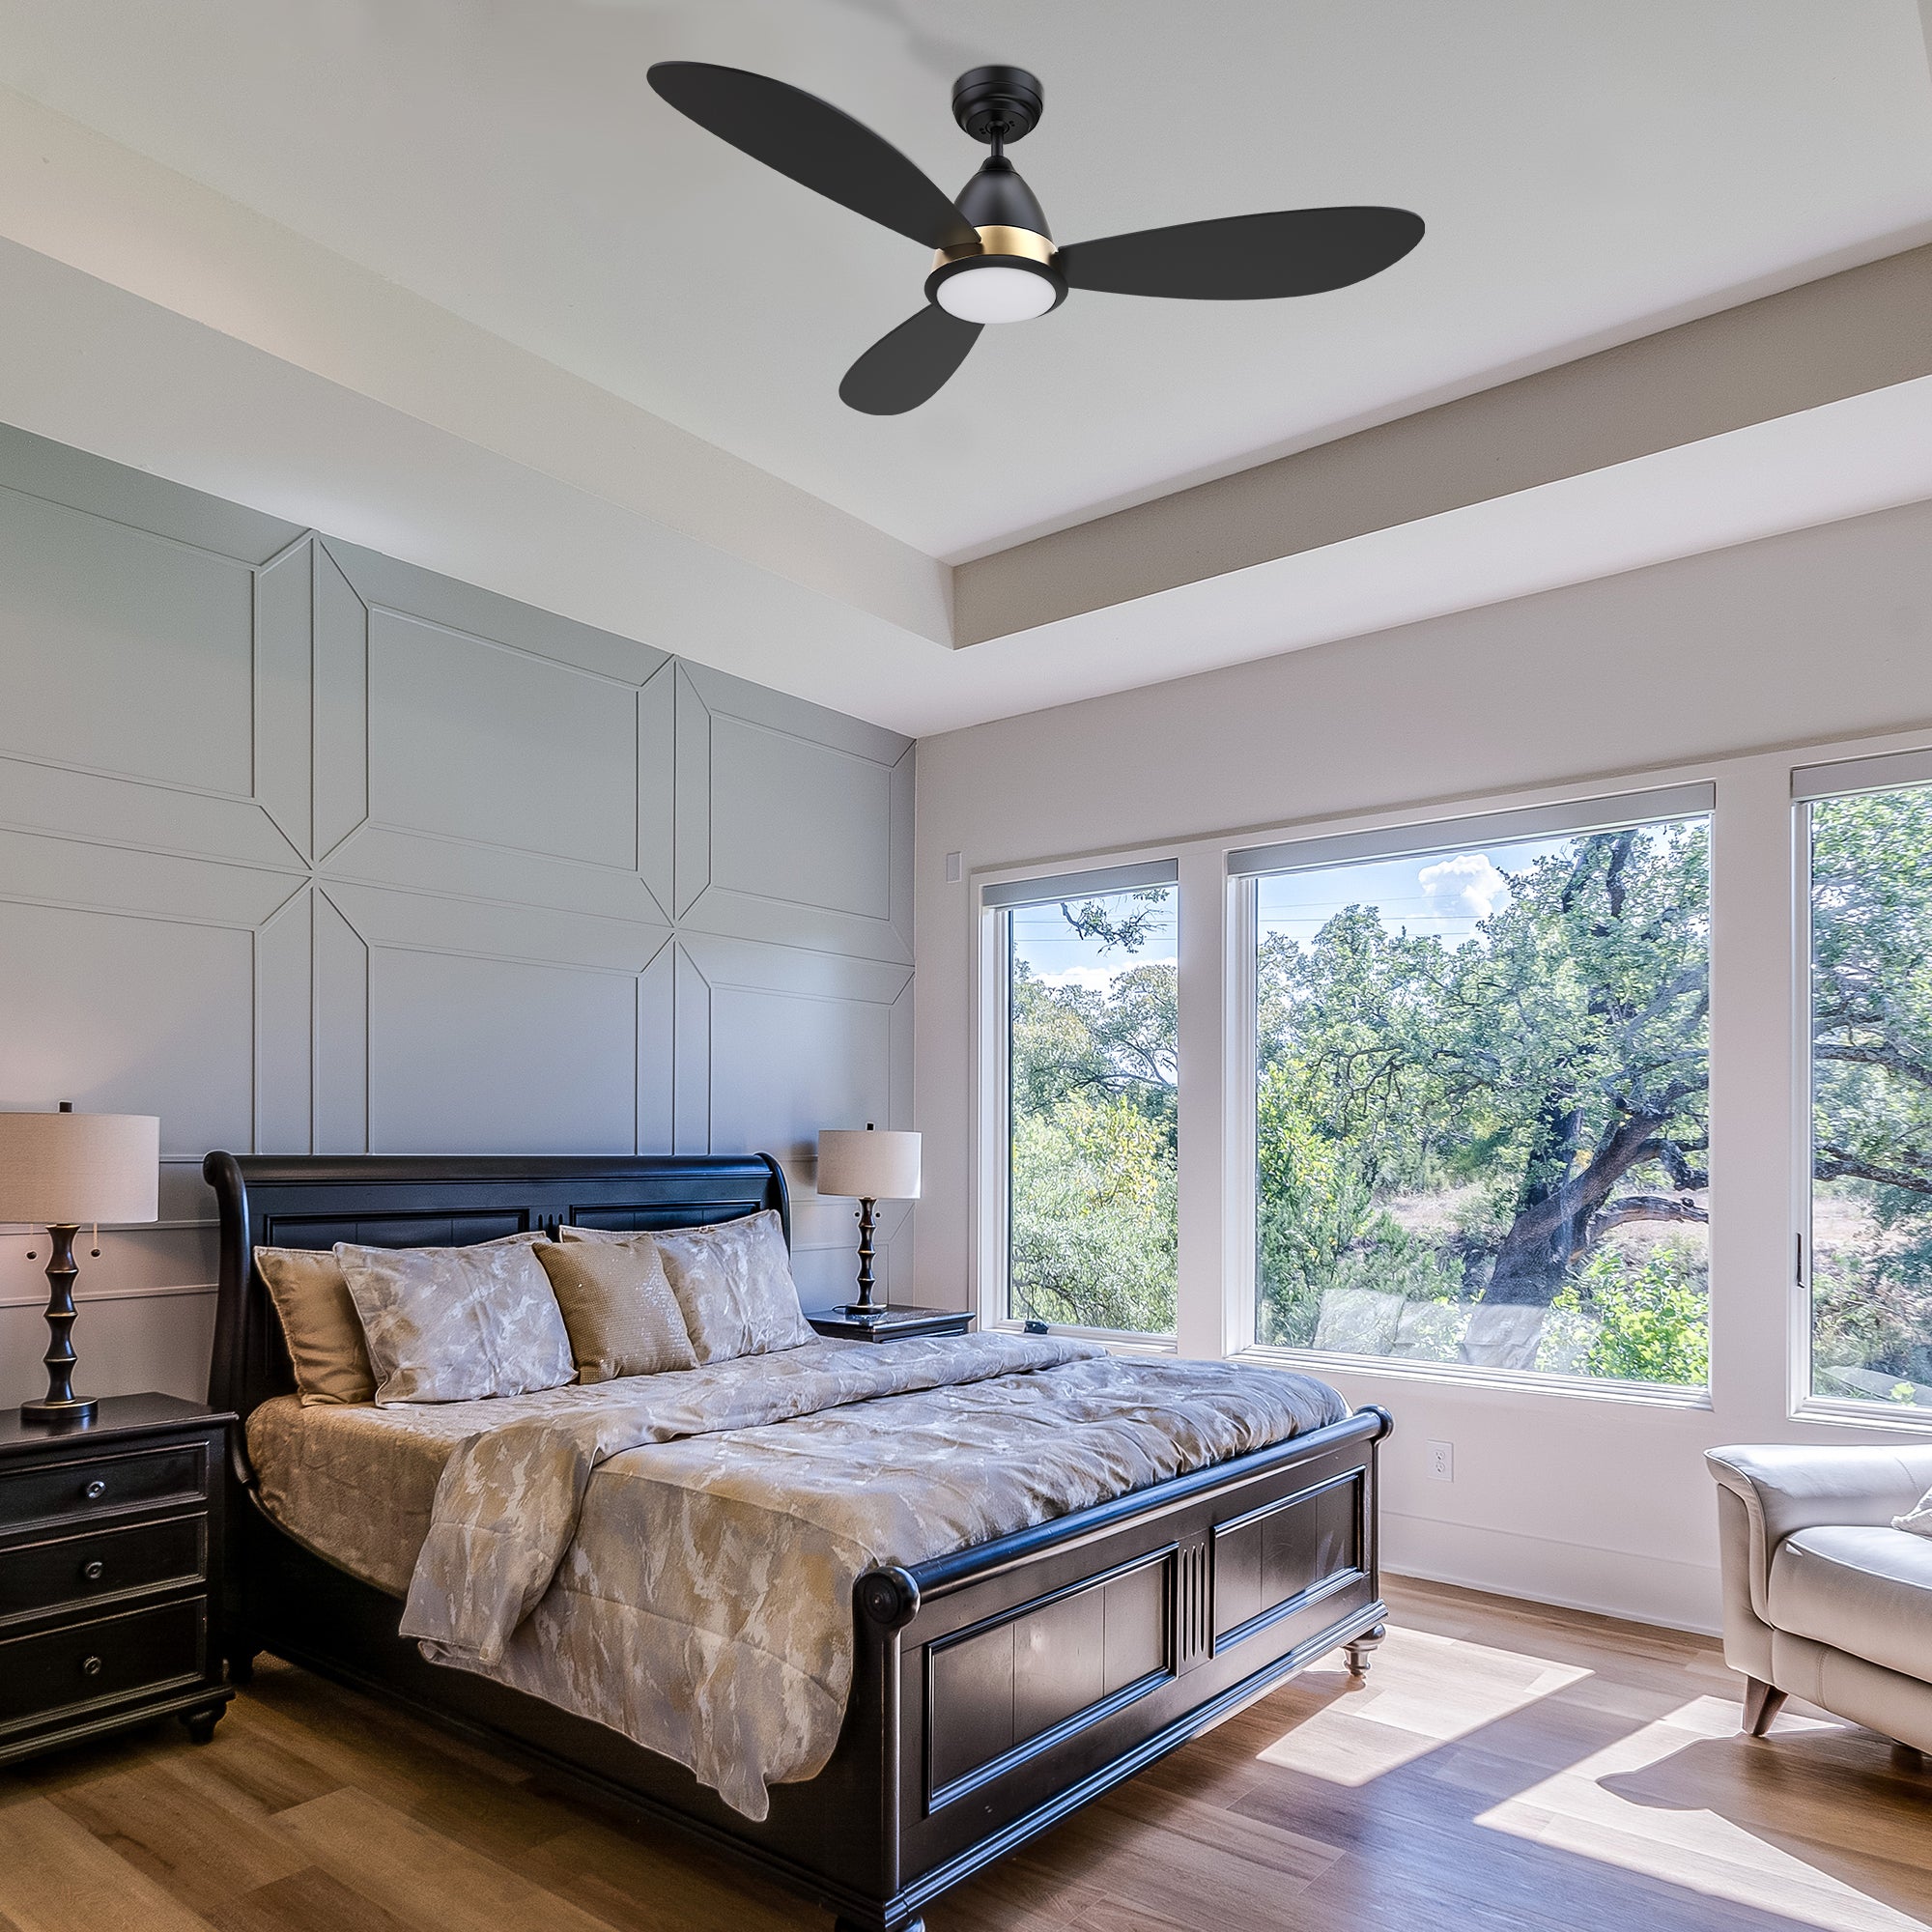 This Fayette 52&#39;&#39; smart ceiling fan keeps your space cool, bright, and stylish. It is a soft modern masterpiece perfect for your large indoor living spaces. This Wifi smart ceiling fan is a simplicity designing with black finish, use elegant Plywood blades and has an integrated 4K LED daylight. The fan features Remote control, Wi-Fi apps, Siri Shortcut and Voice command technology (compatible with Amazon Alexa and Google Home Assistant ) to set fan preferences.